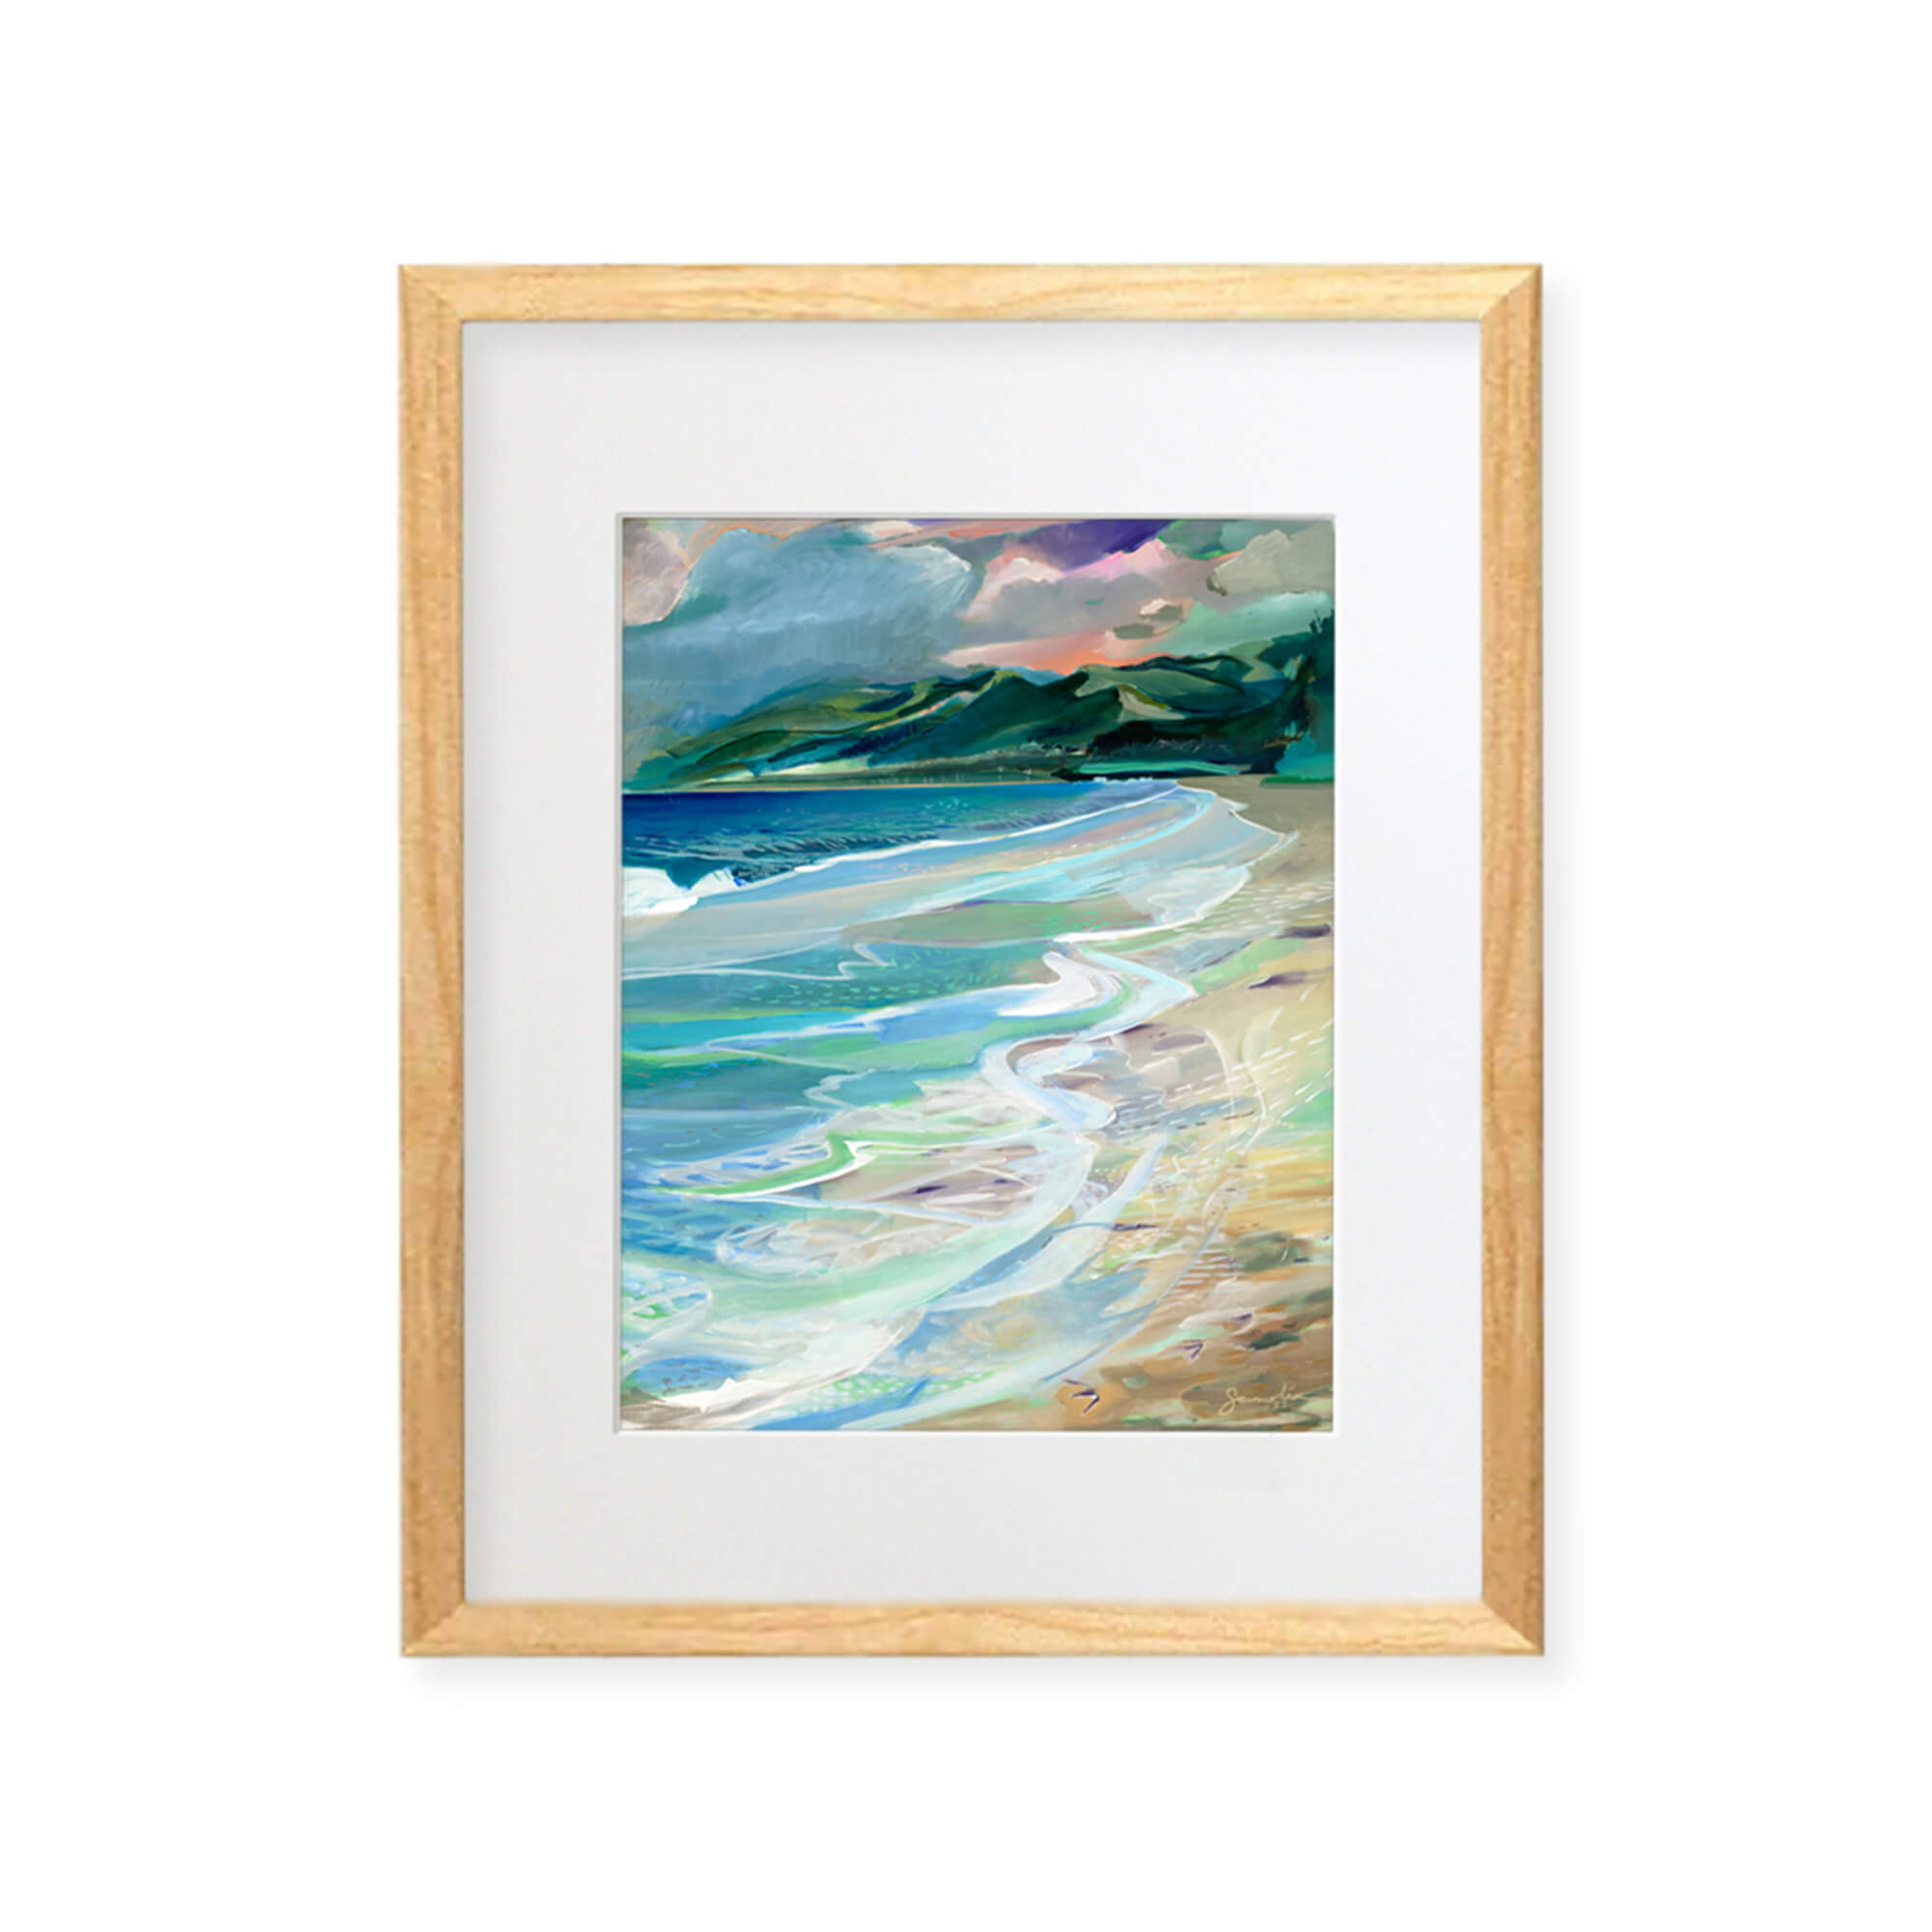 A framed matted art print featuring a beautiful abstract landscape with crashing waves and distant mountains by popular Hawaii artist Saumolia Puapuaga